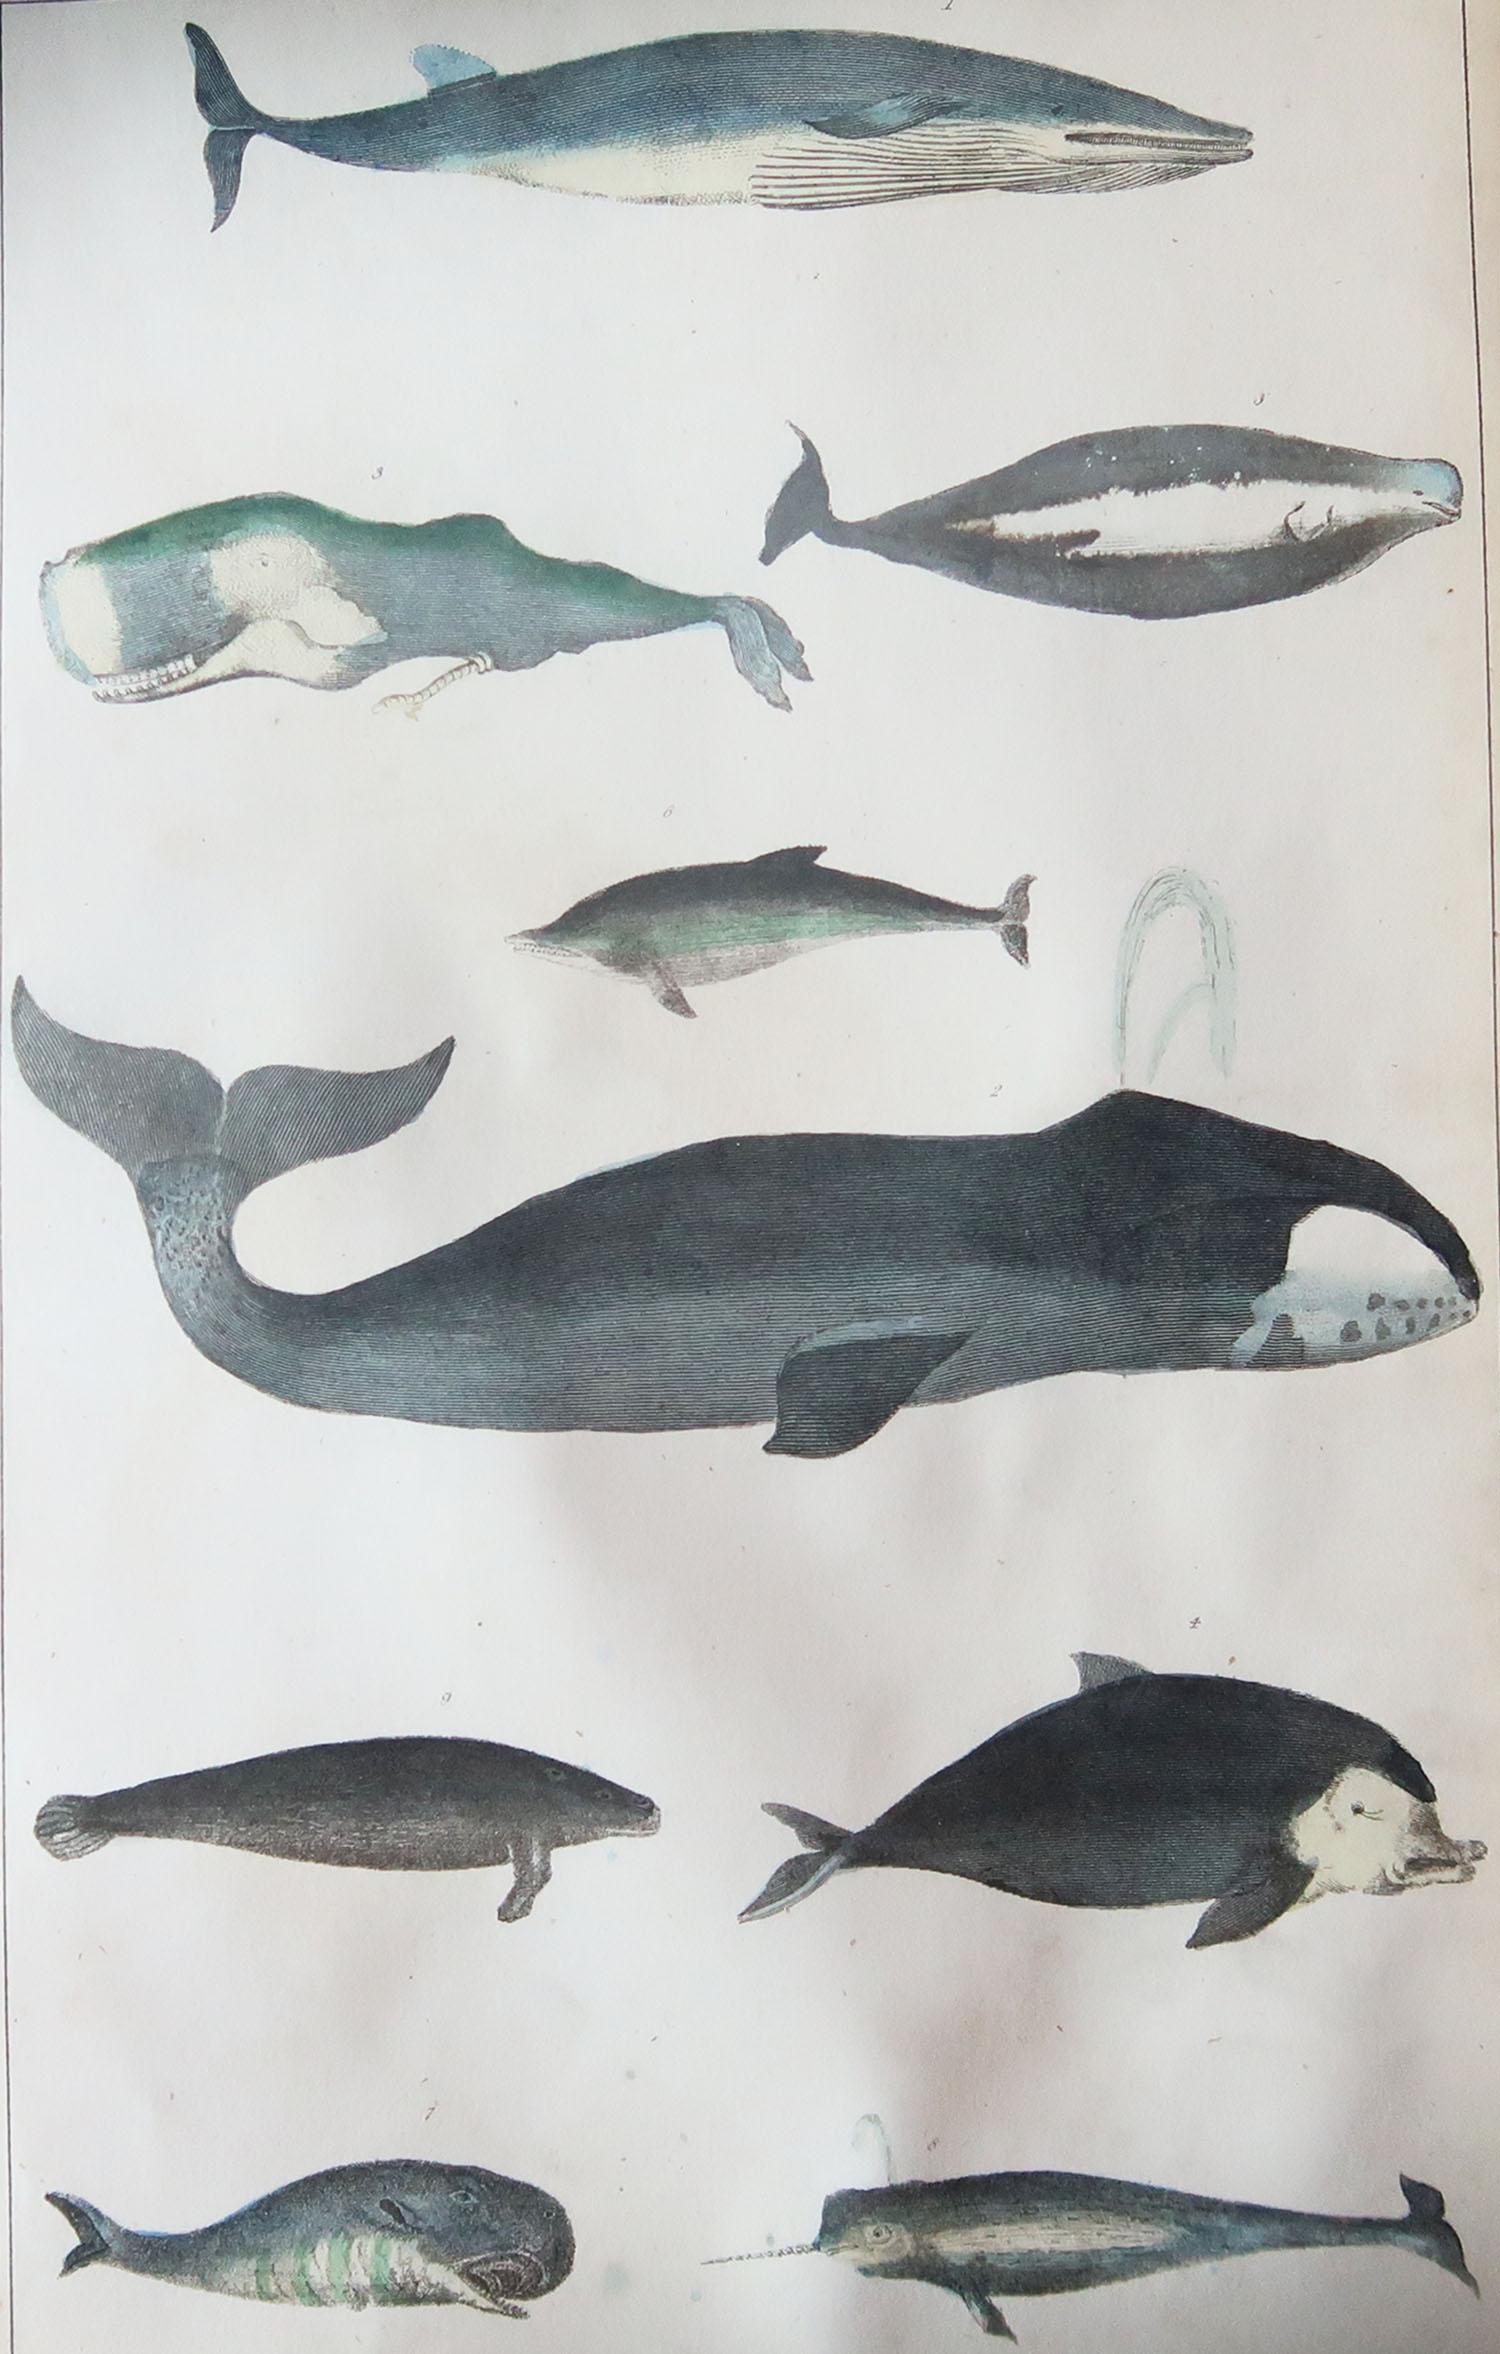 Great image of whales.

Unframed. It gives you the option of perhaps making a set up using your own choice of frames.

Lithograph after Cpt. Brown with original hand color.

Published, 1847.

Repair to a minor piercing

Free shipping.